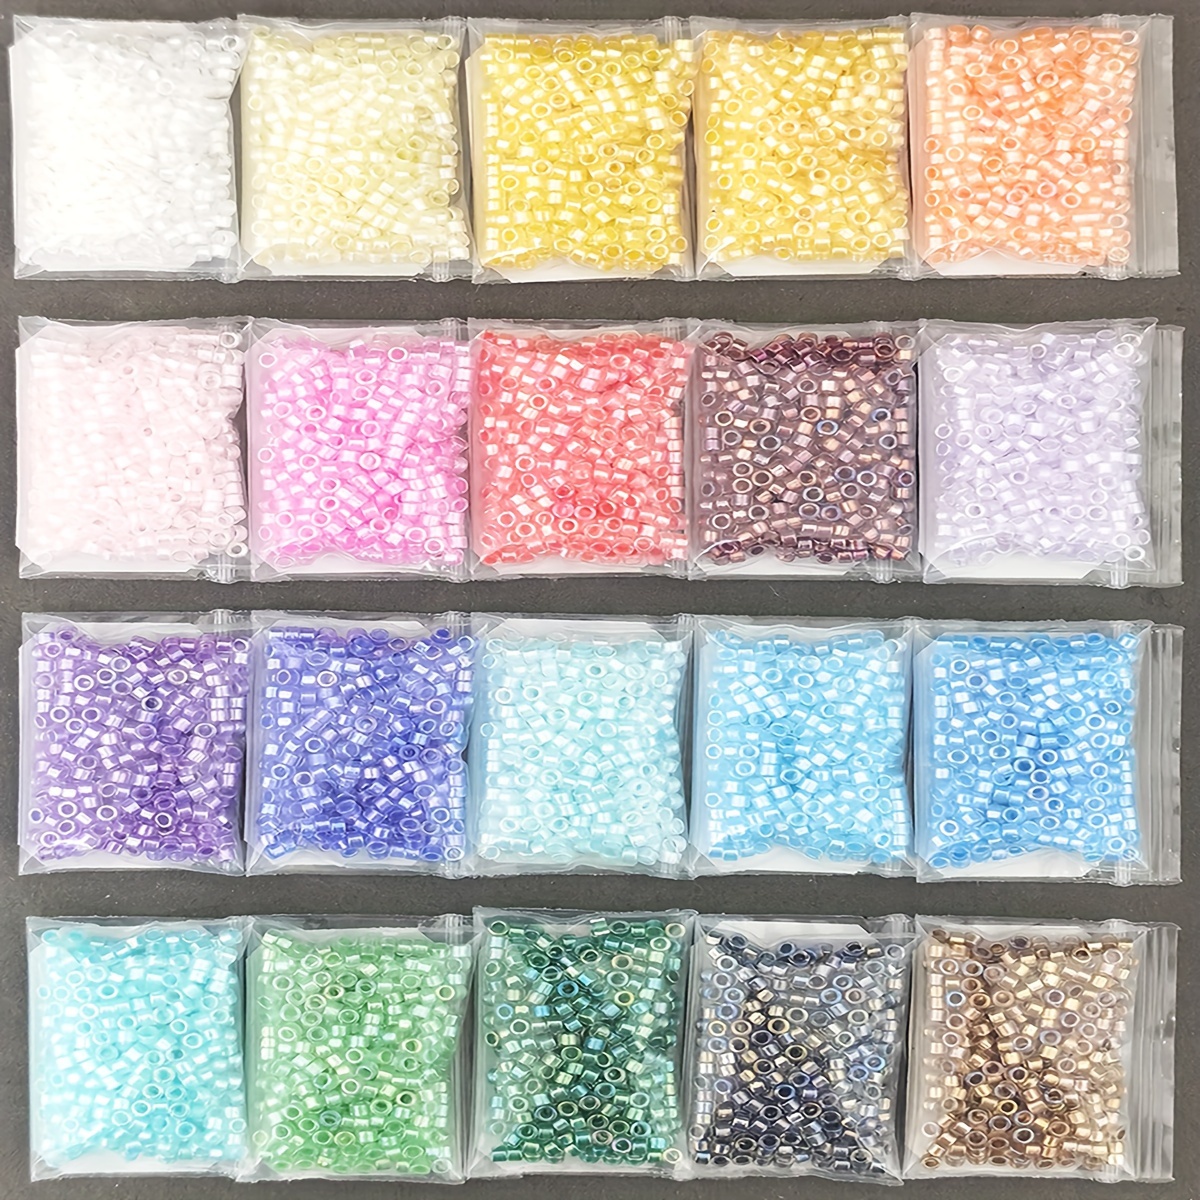 

20pcs 7000pcs Aurora Borealis Vintage Seed Beads, Assorted Colors Glass Bead Set For Jewelry Making, Diy Bracelets, Earrings, Necklaces Crafting